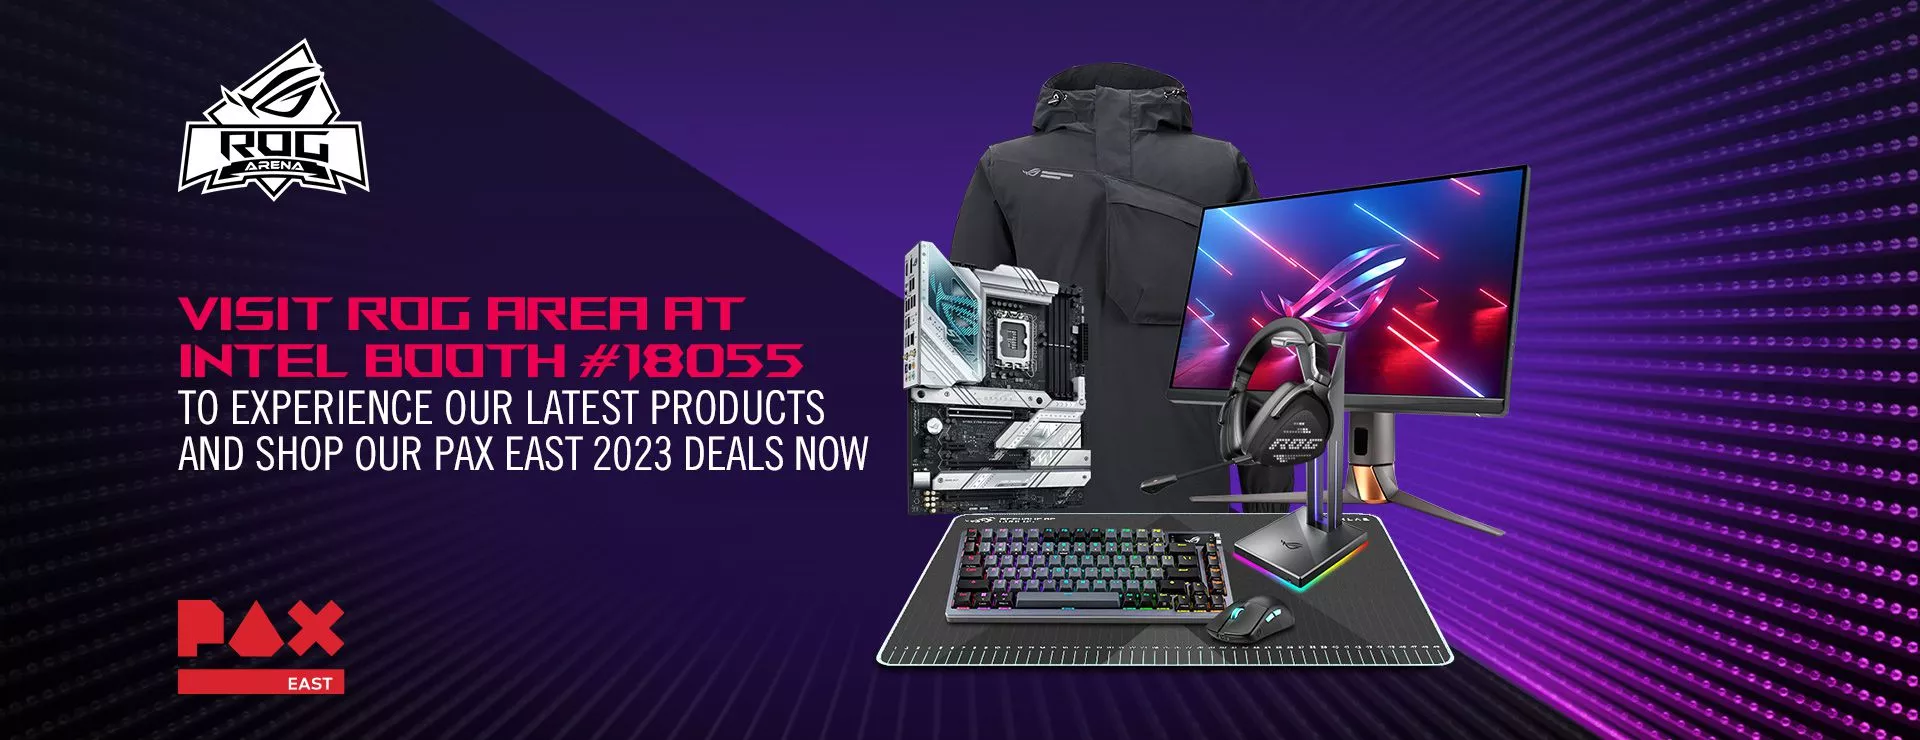 PAX East image of ROG products including Motherboard, Monitor, Keyboard, Mouse, Headphone, Monitor, Jacket.  Visit ROG Area At Intel Booth #18055 To Experience Our Latest Products and Shop Our PAX East 2023 Deals Now